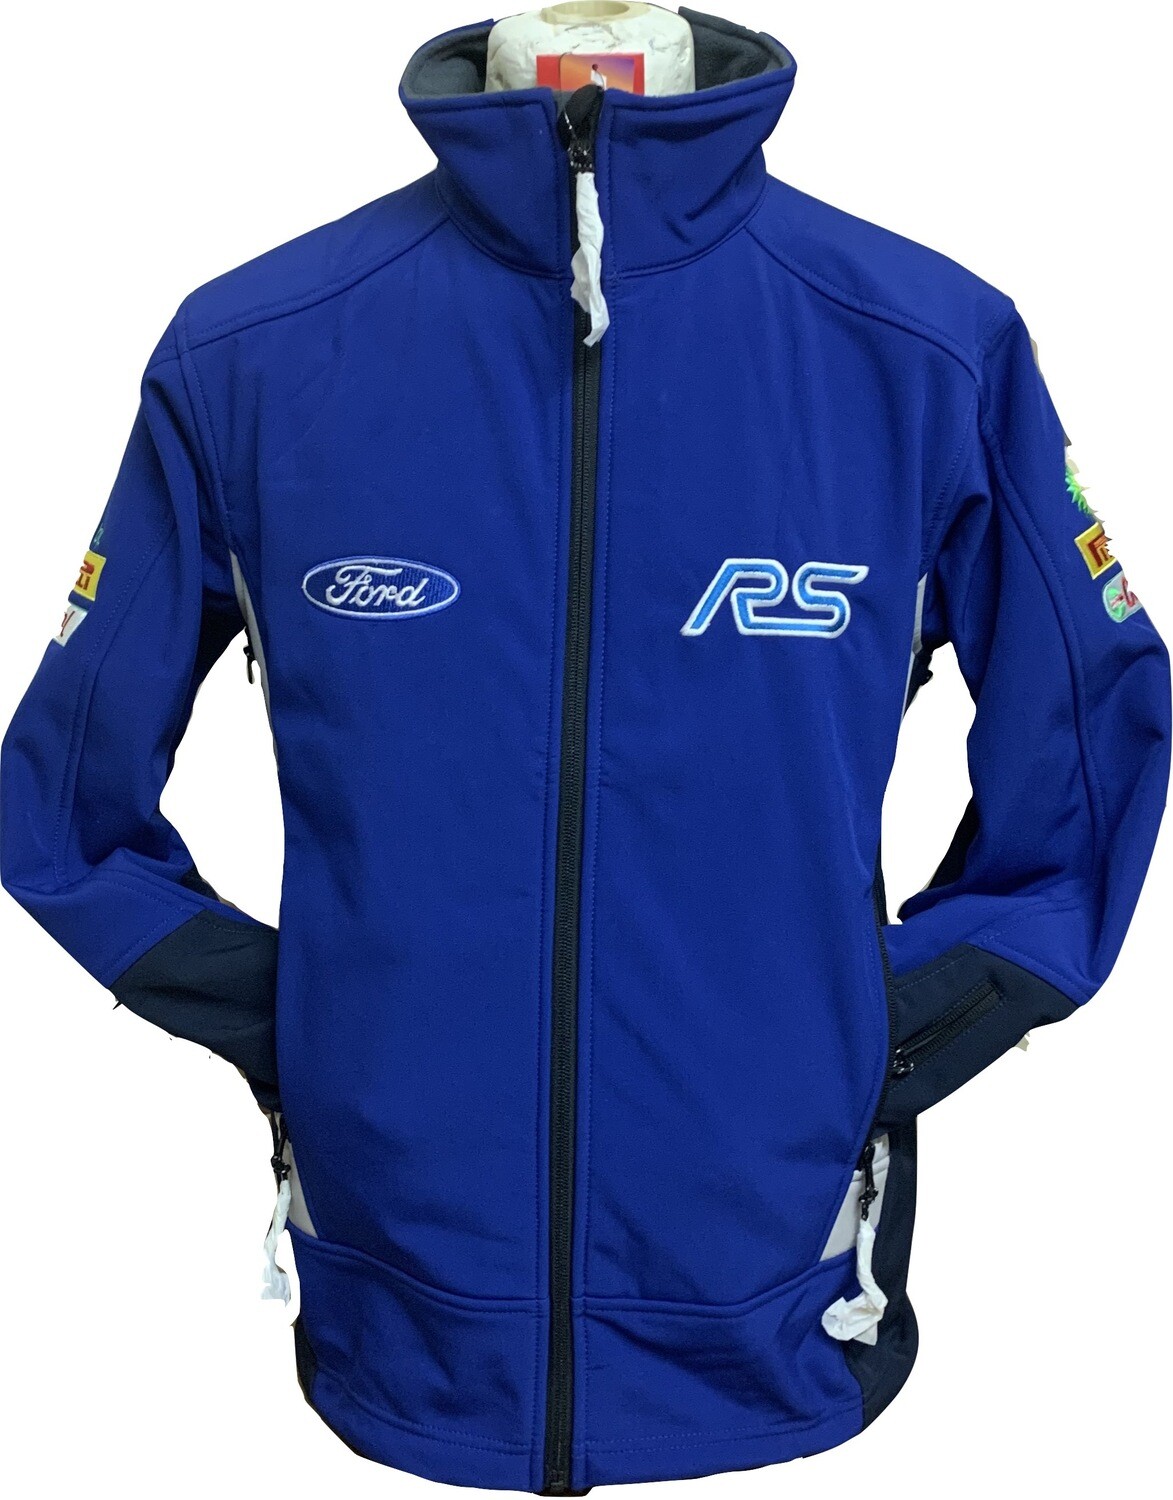 RS Ford soft-shell Waterproof Rally Jacket Royal Blue